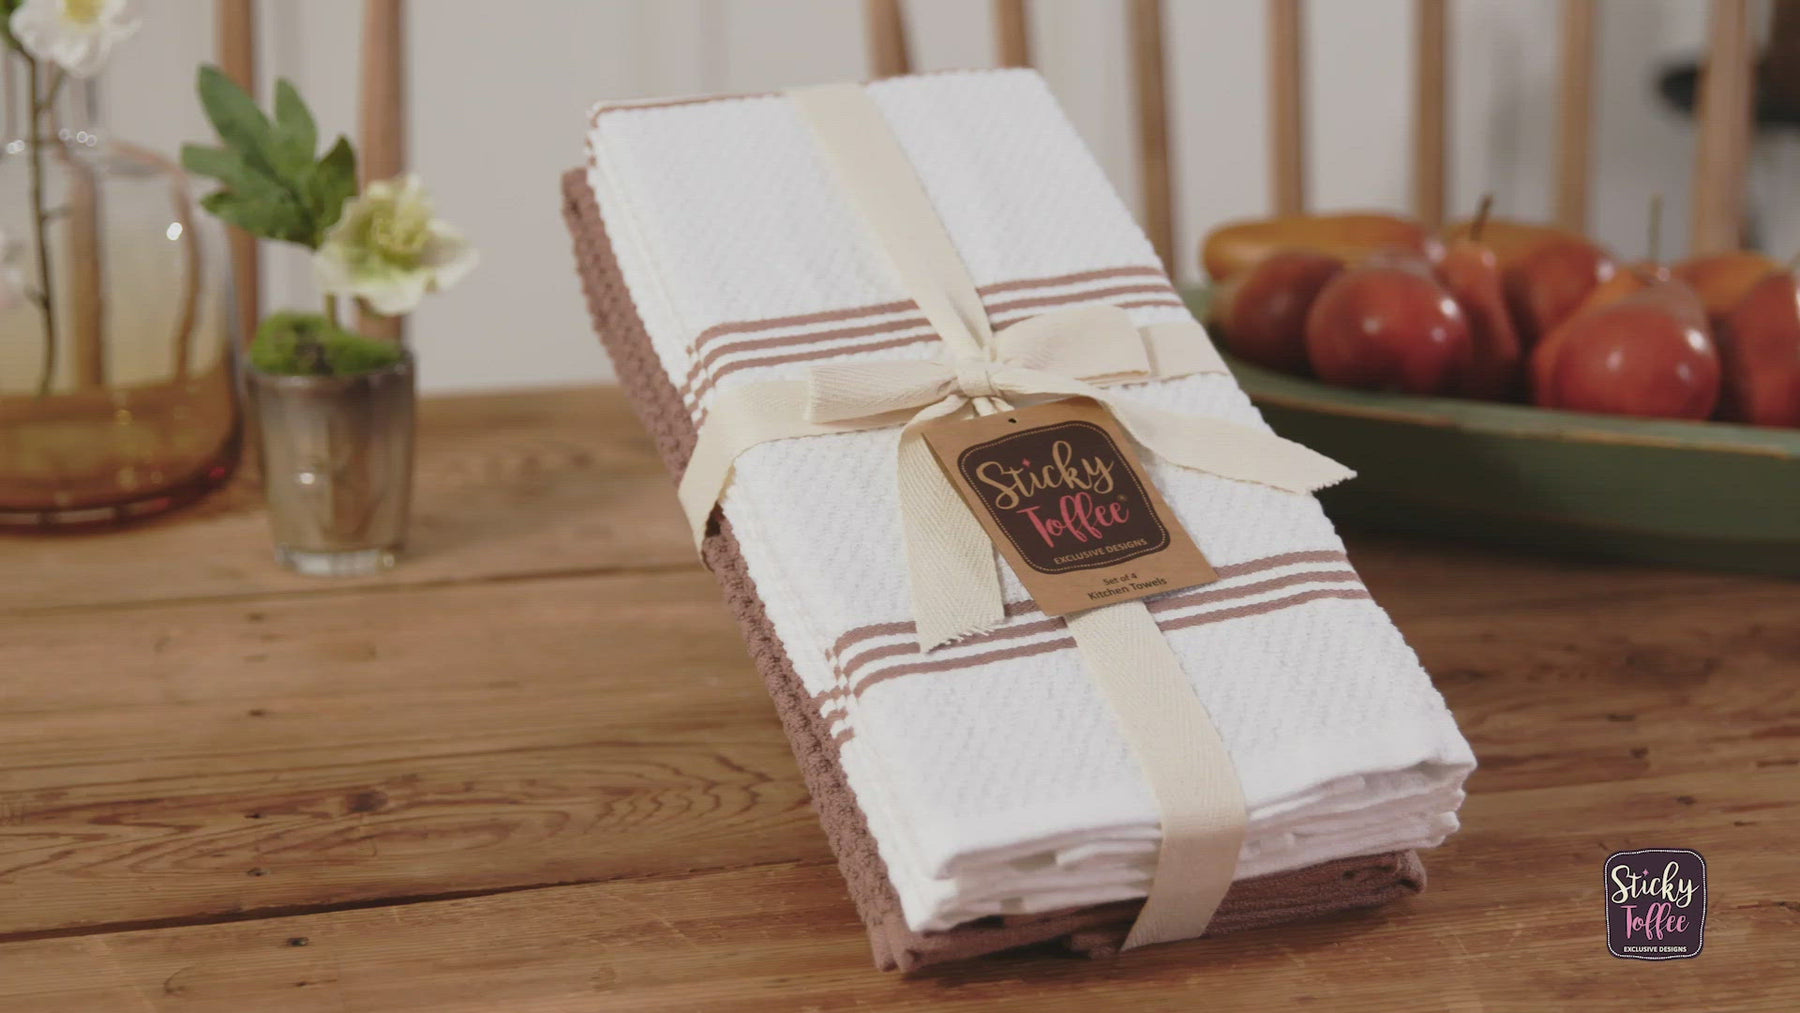 Sticky Toffee Waffle Kitchen Towels Set of 3, White and Tan Cotton Dish Towels for Kitchen, 28 in x 16 in, Size: 28 x 16, Beige